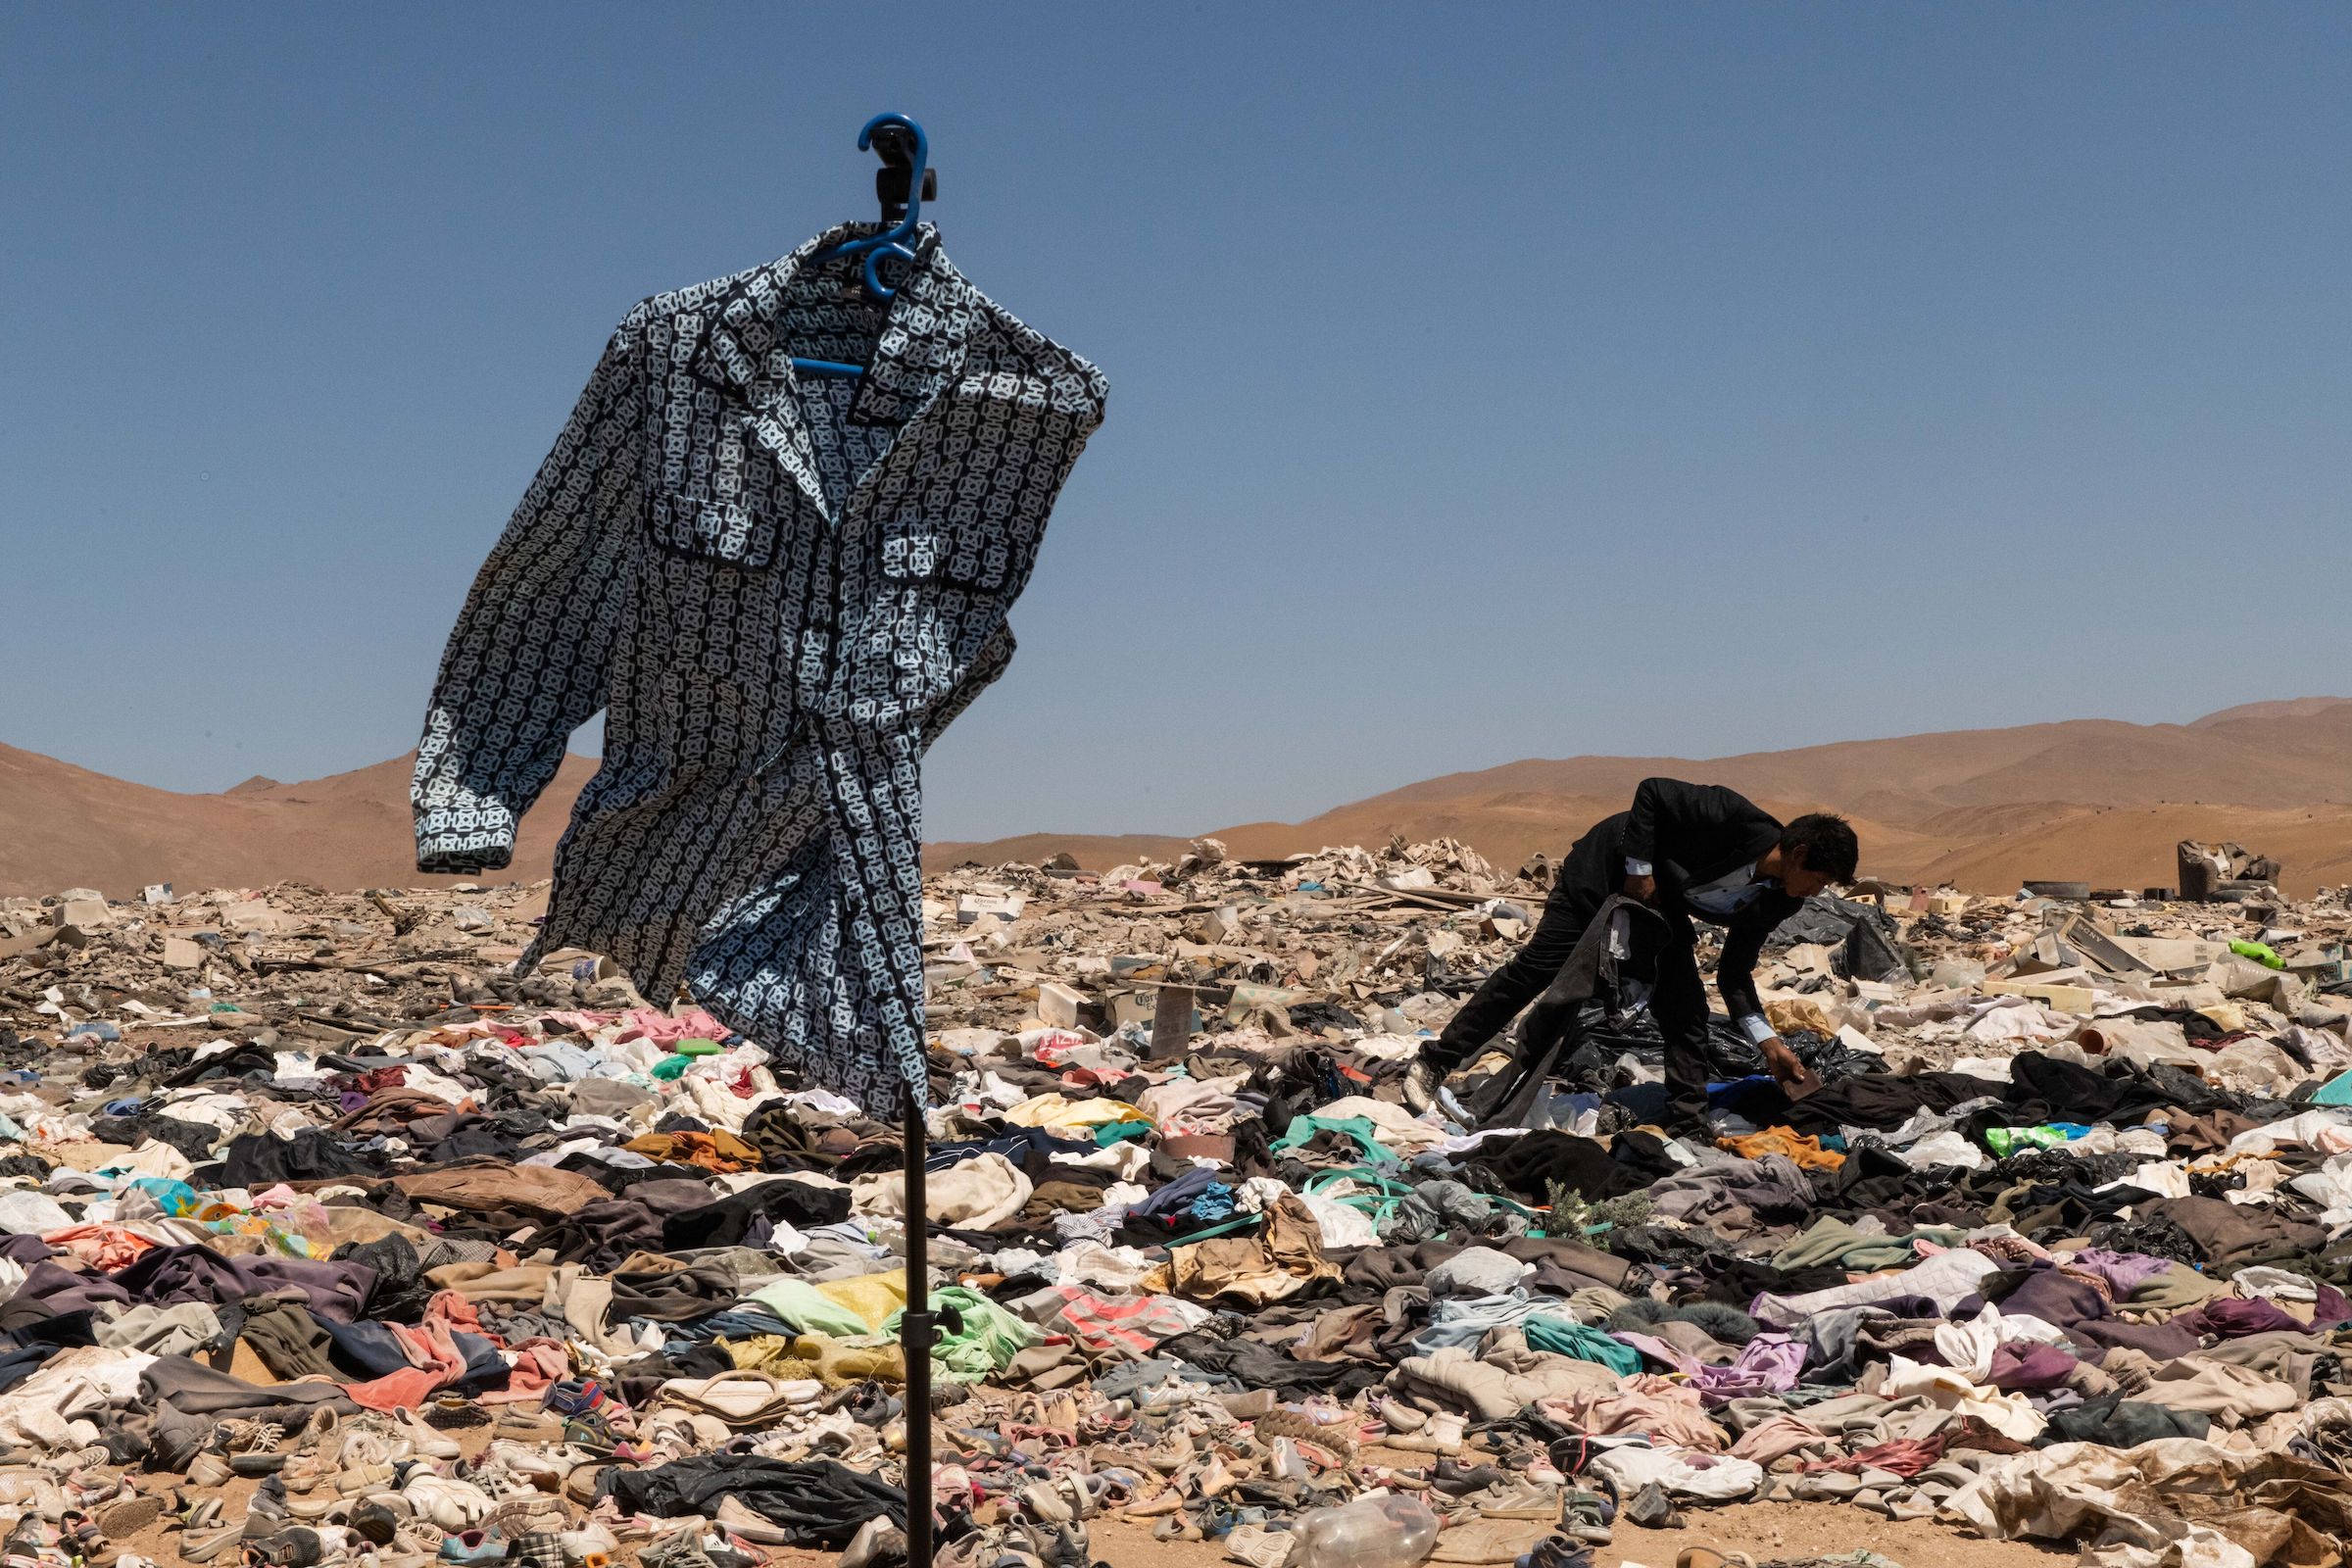 What Needs to Happen to Tackle Fashion's Climate Impact